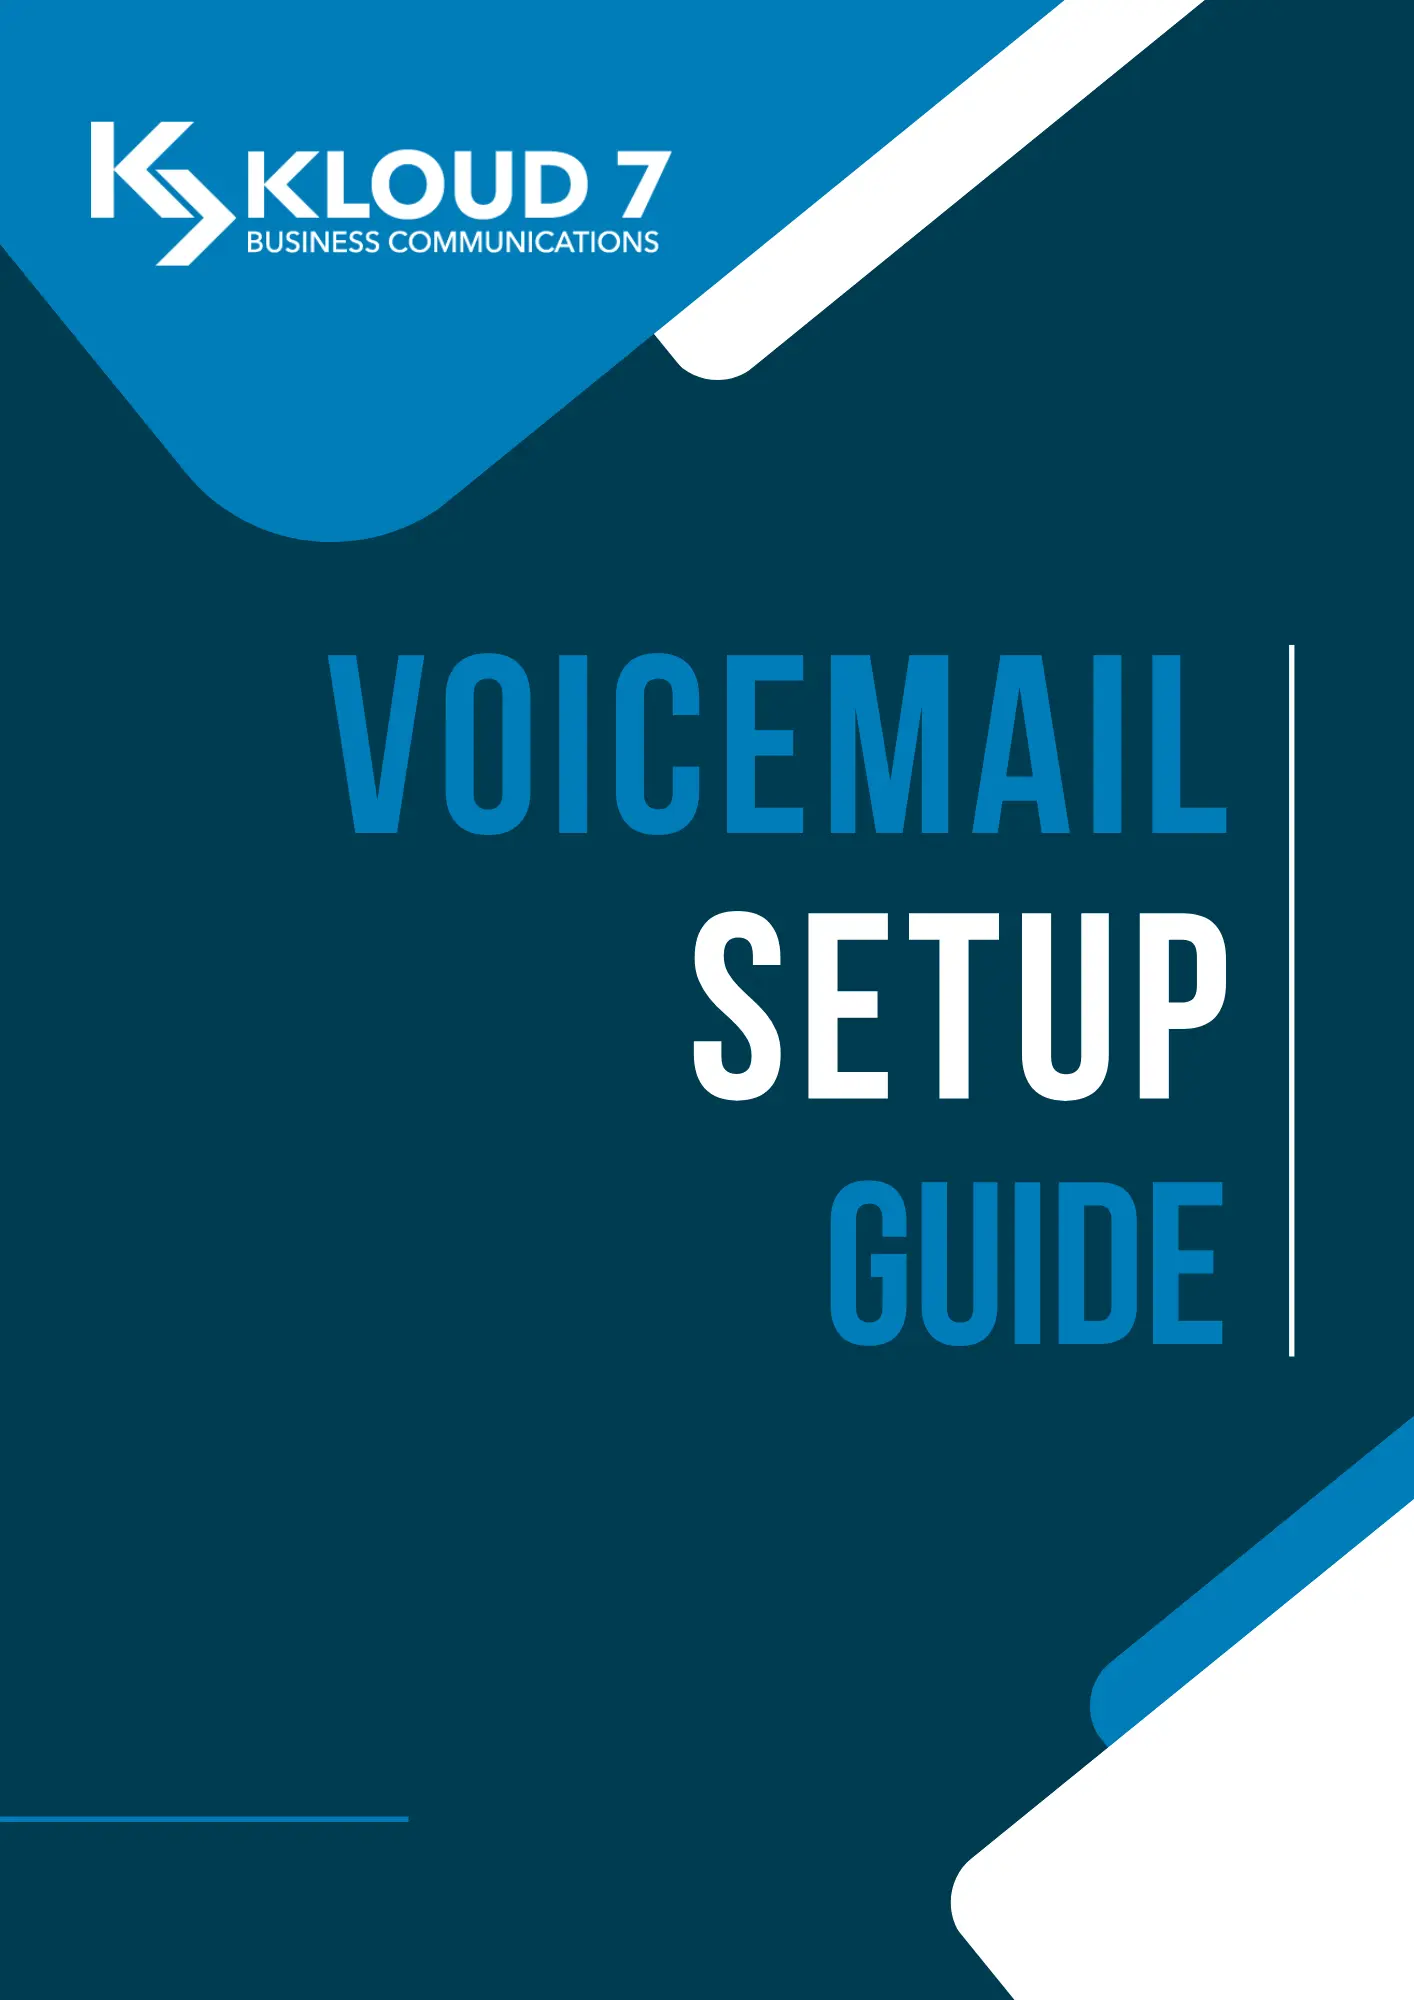 The kloud 7 voicemail setup guide to get you started.